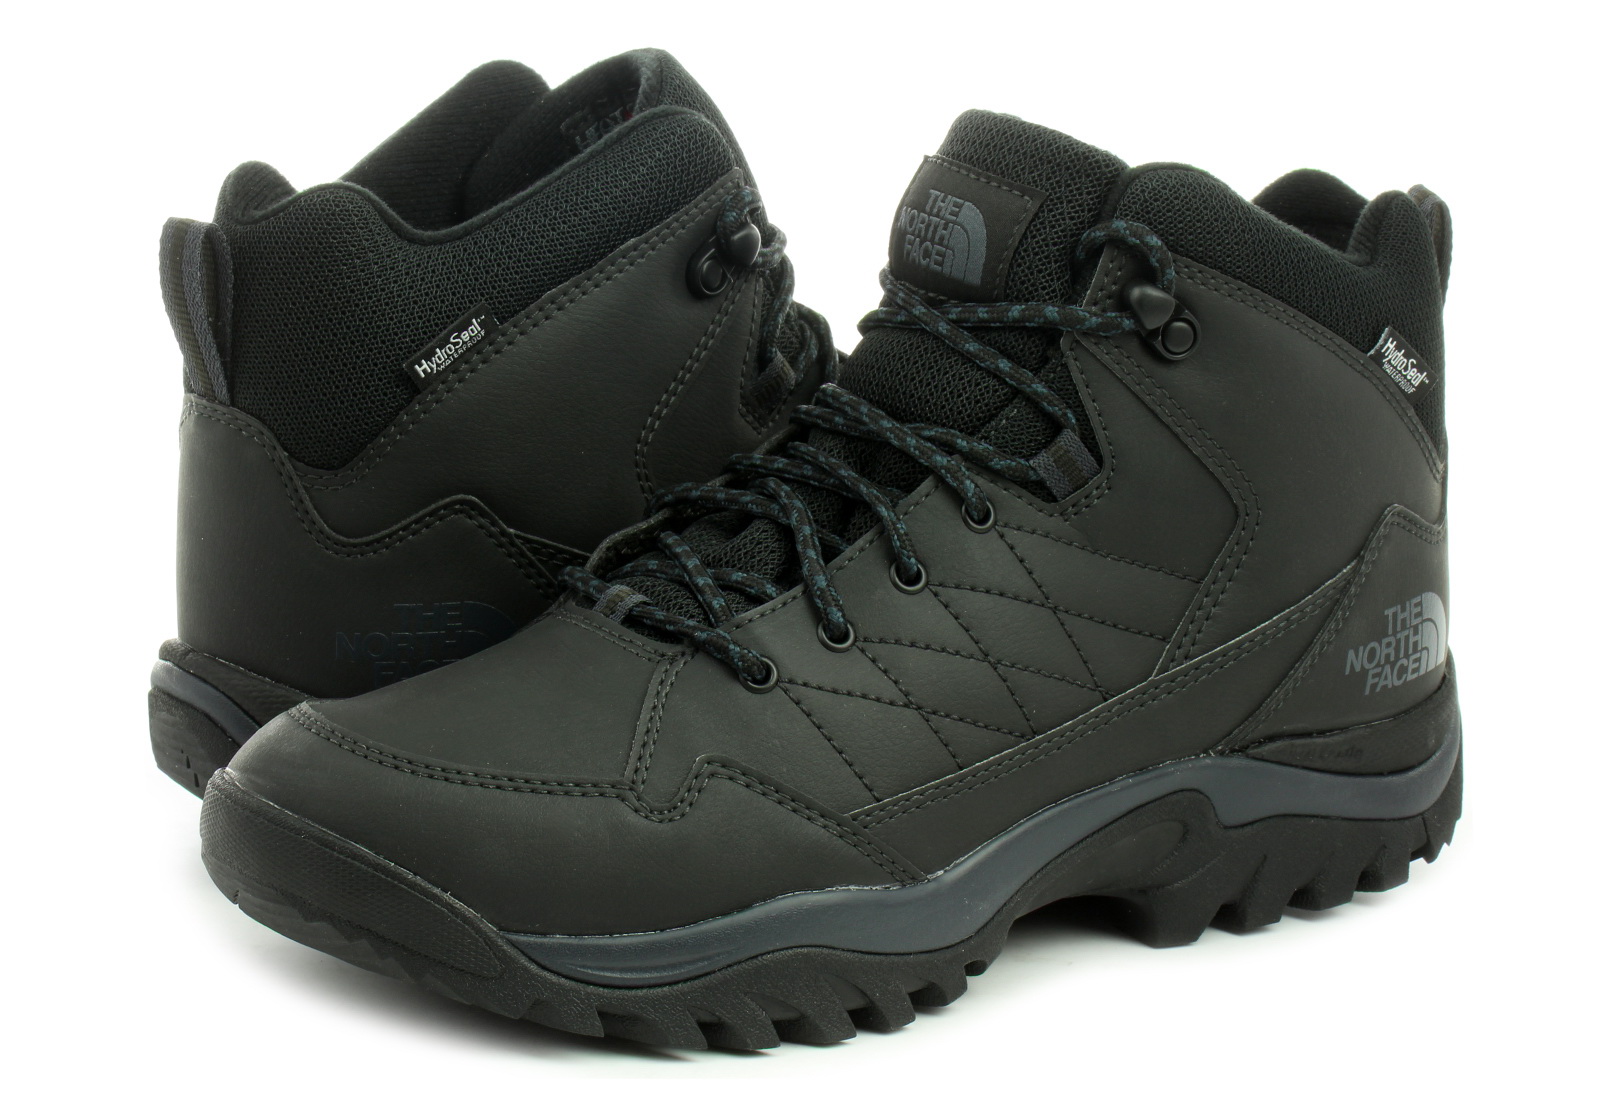 north face storm strike boots review